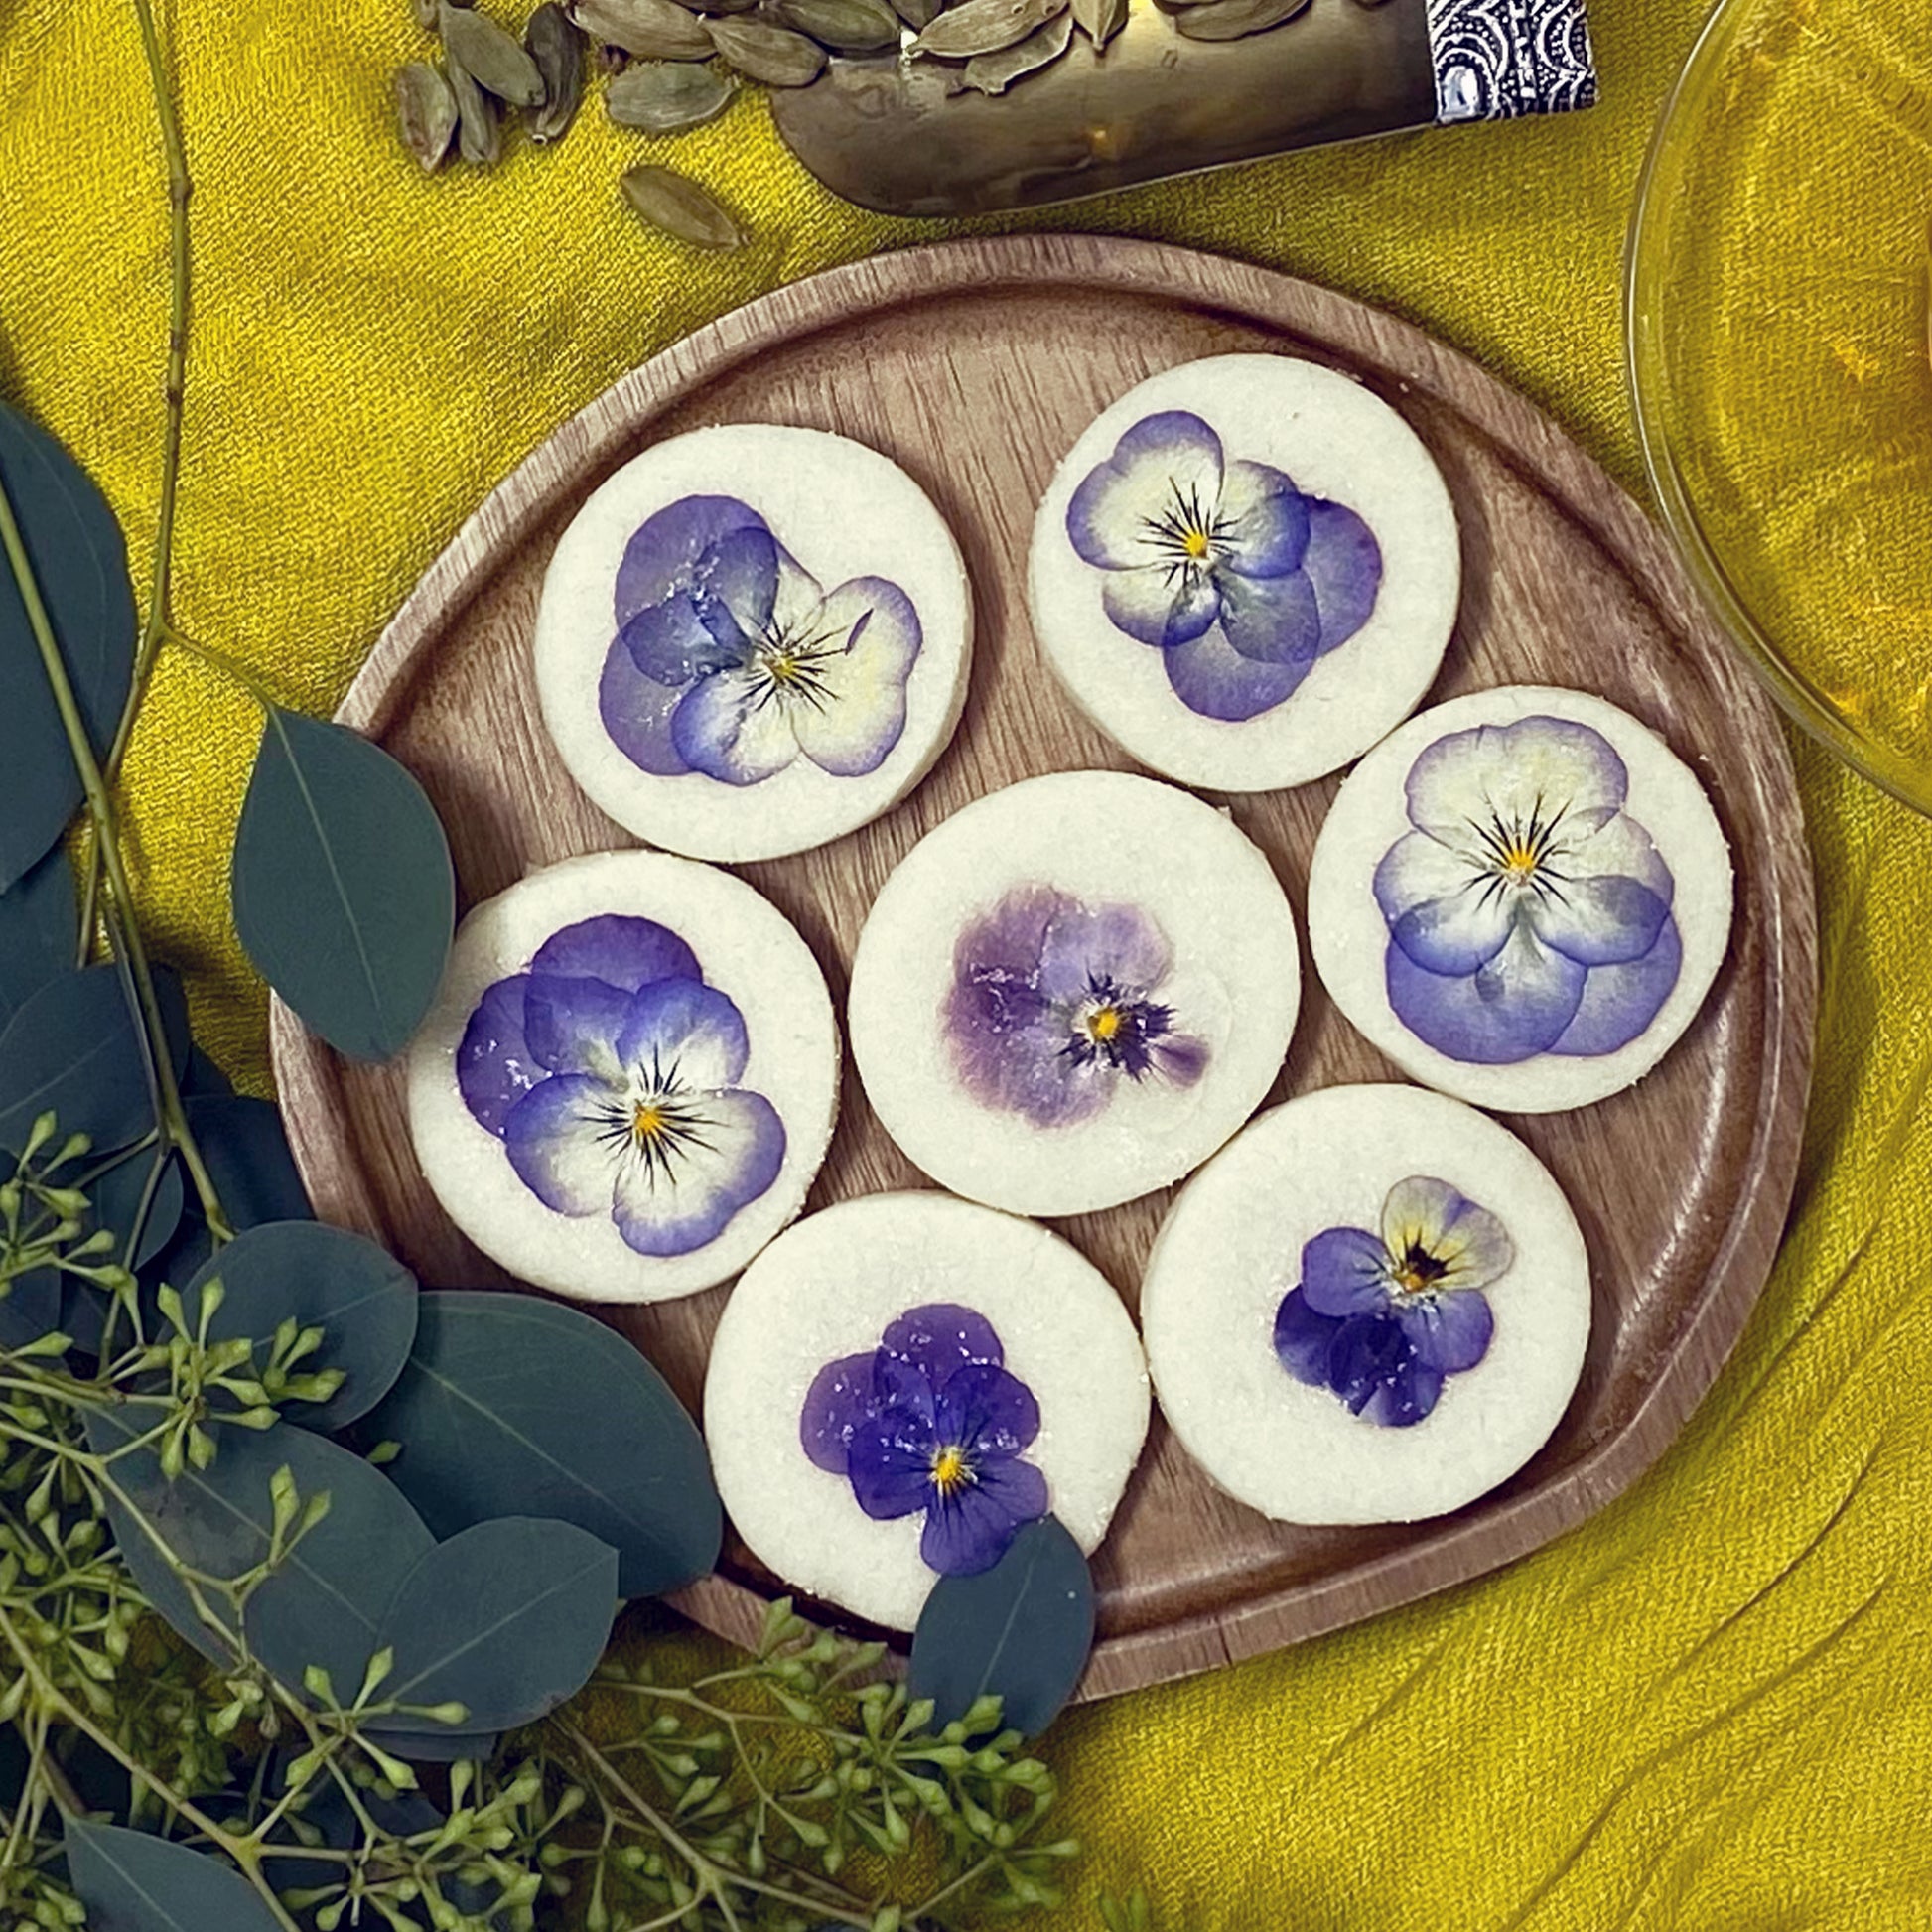 Pressed and Dried Edible Pansy Flowers Organic Grown Sustainably Harve –  DyBeeApothecary